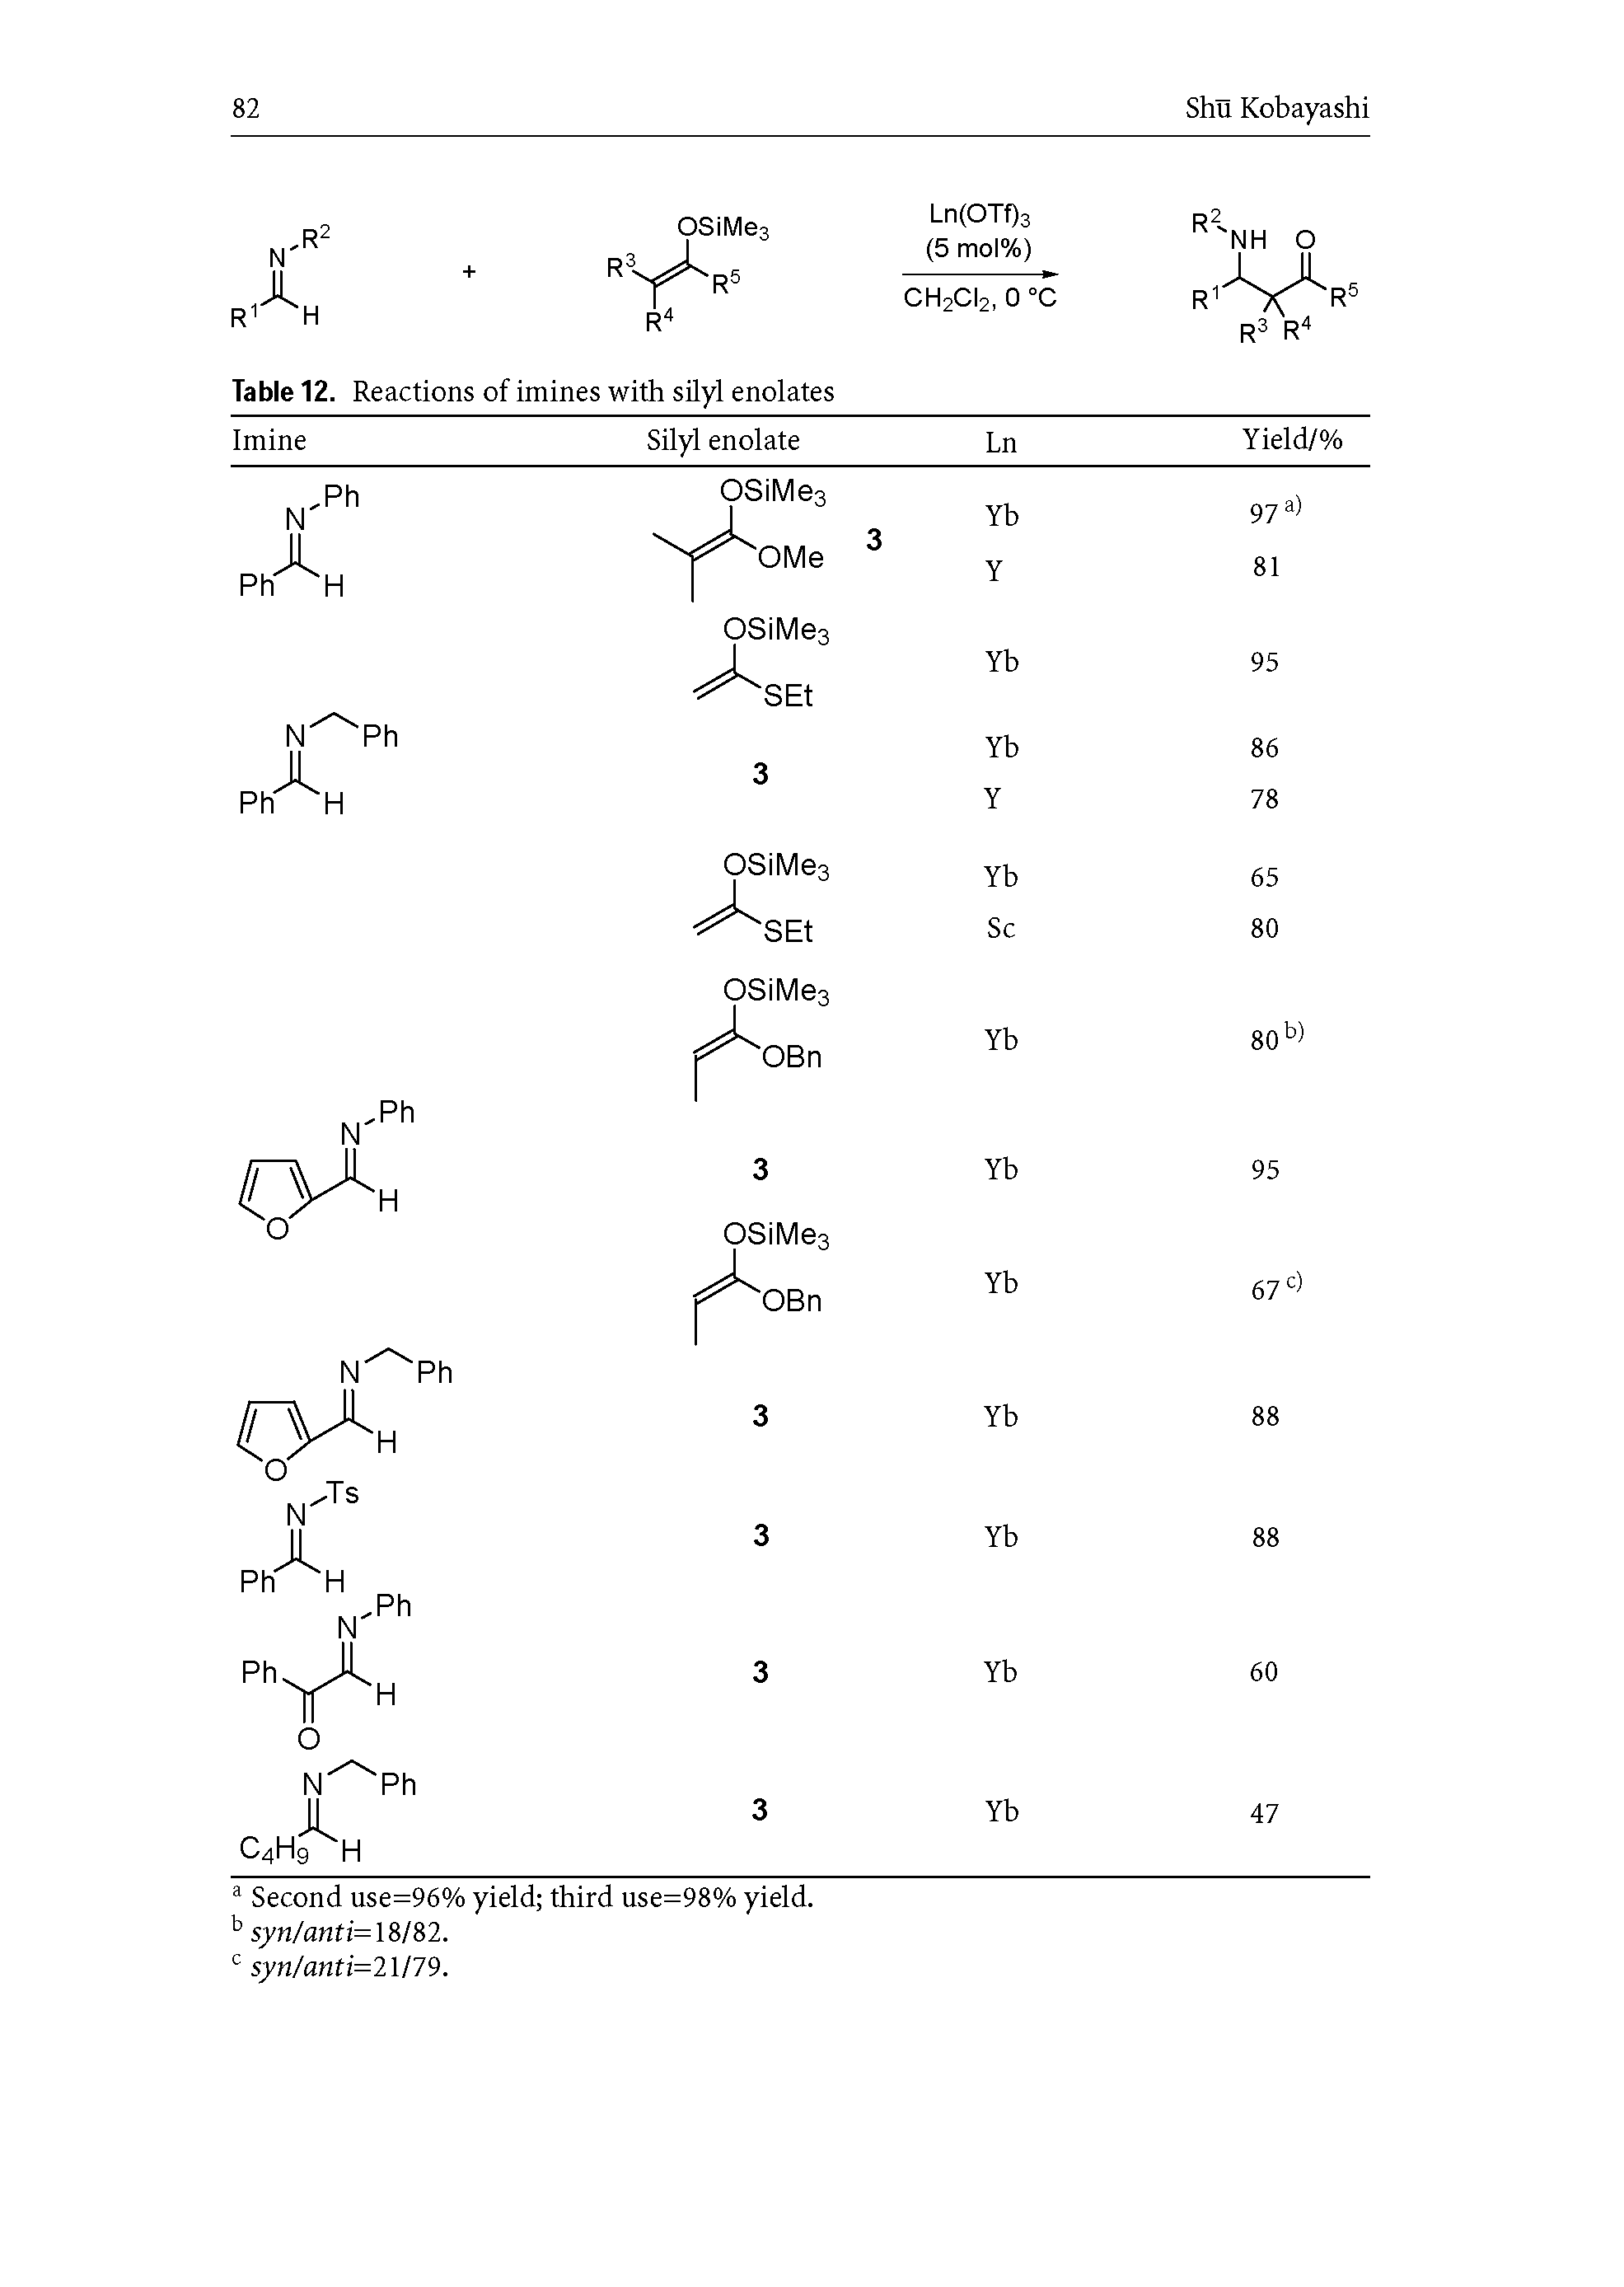 Table 12. Reactions of imines with silyl enolates...